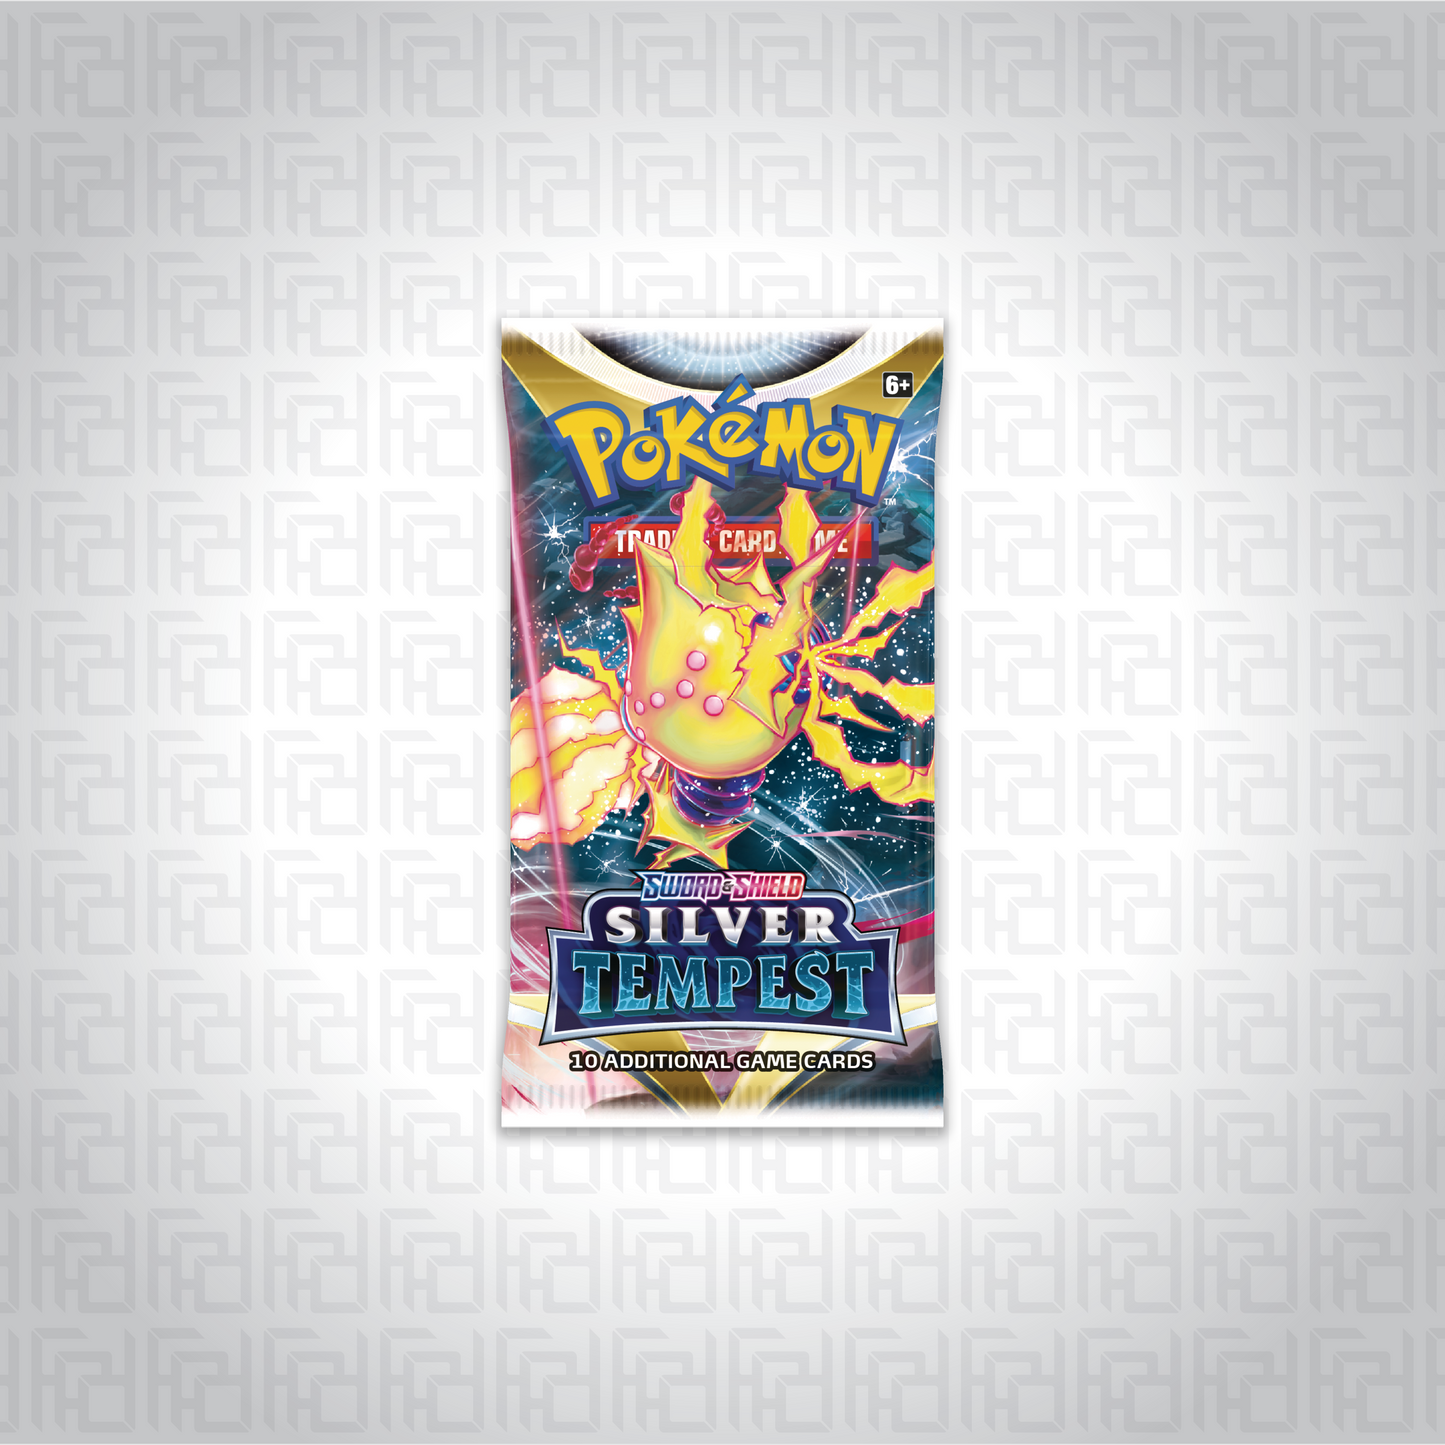 Pokemon Trading Card Game booster pack of Sword & Shield—Silver Tempest expansion.